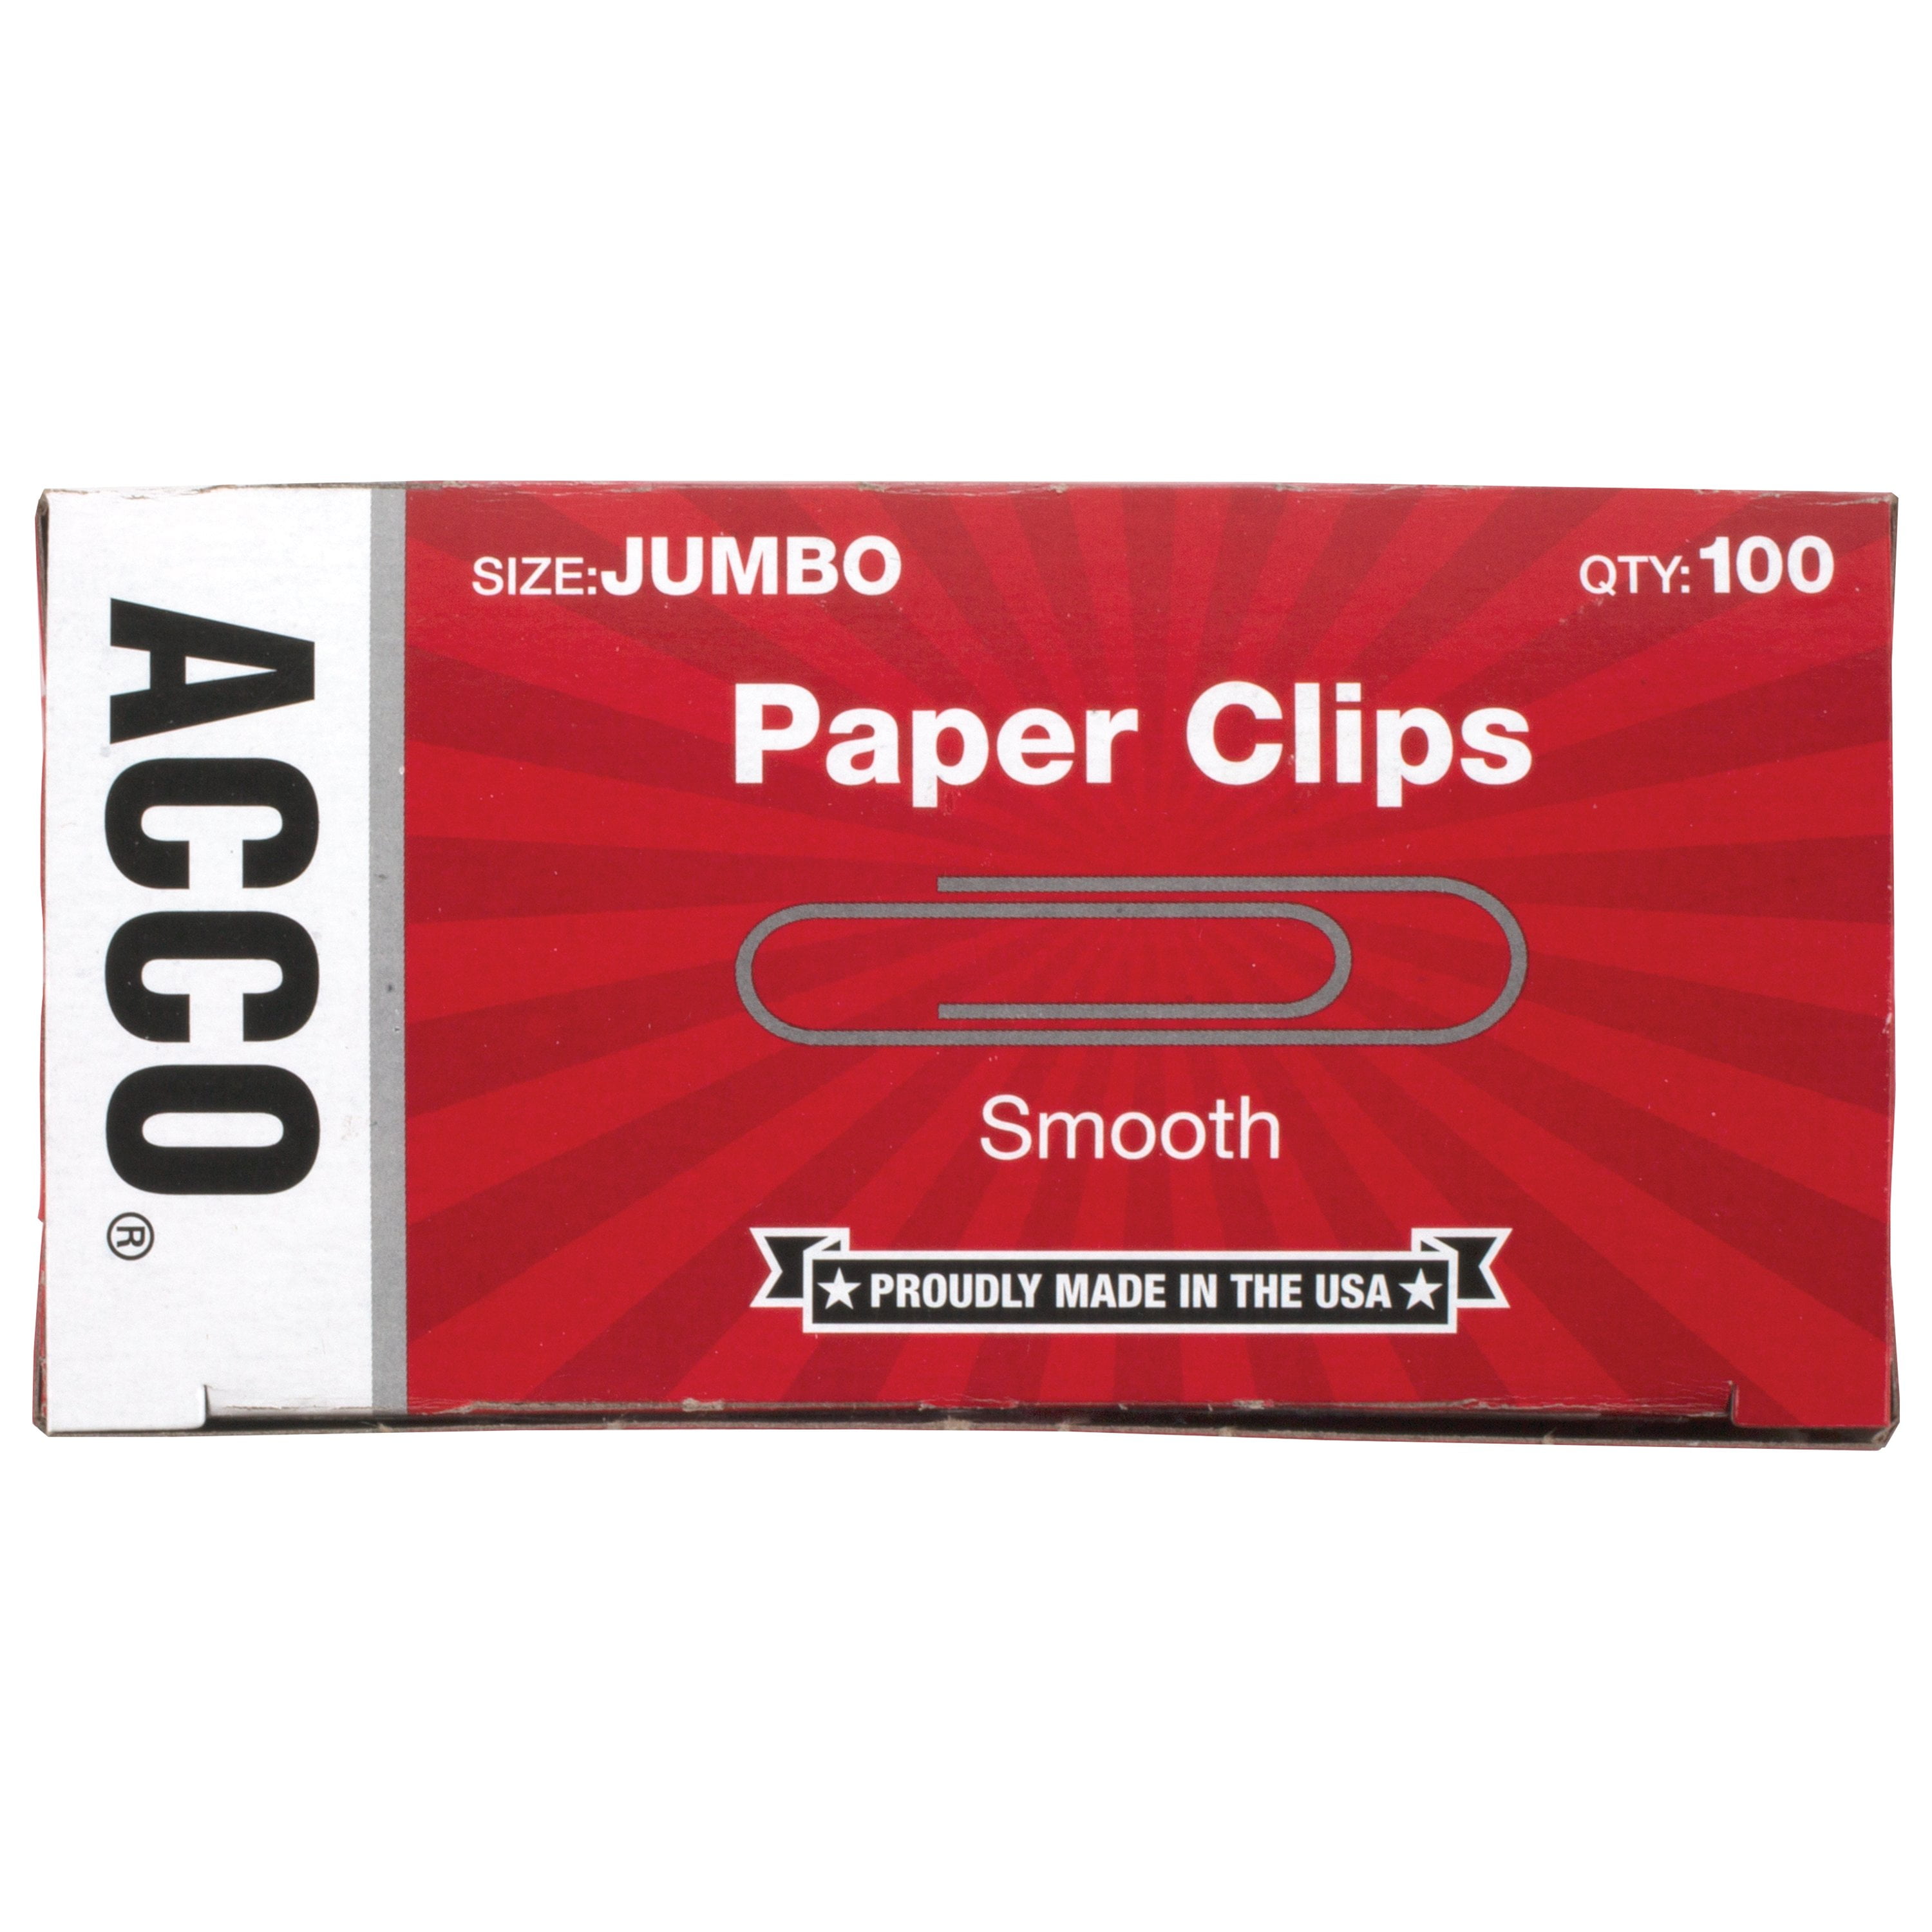 Details about   ACCO Paper Clips Jumbo A70... Smooth 100/Box 1 Case 50 Boxes/Case Economy 